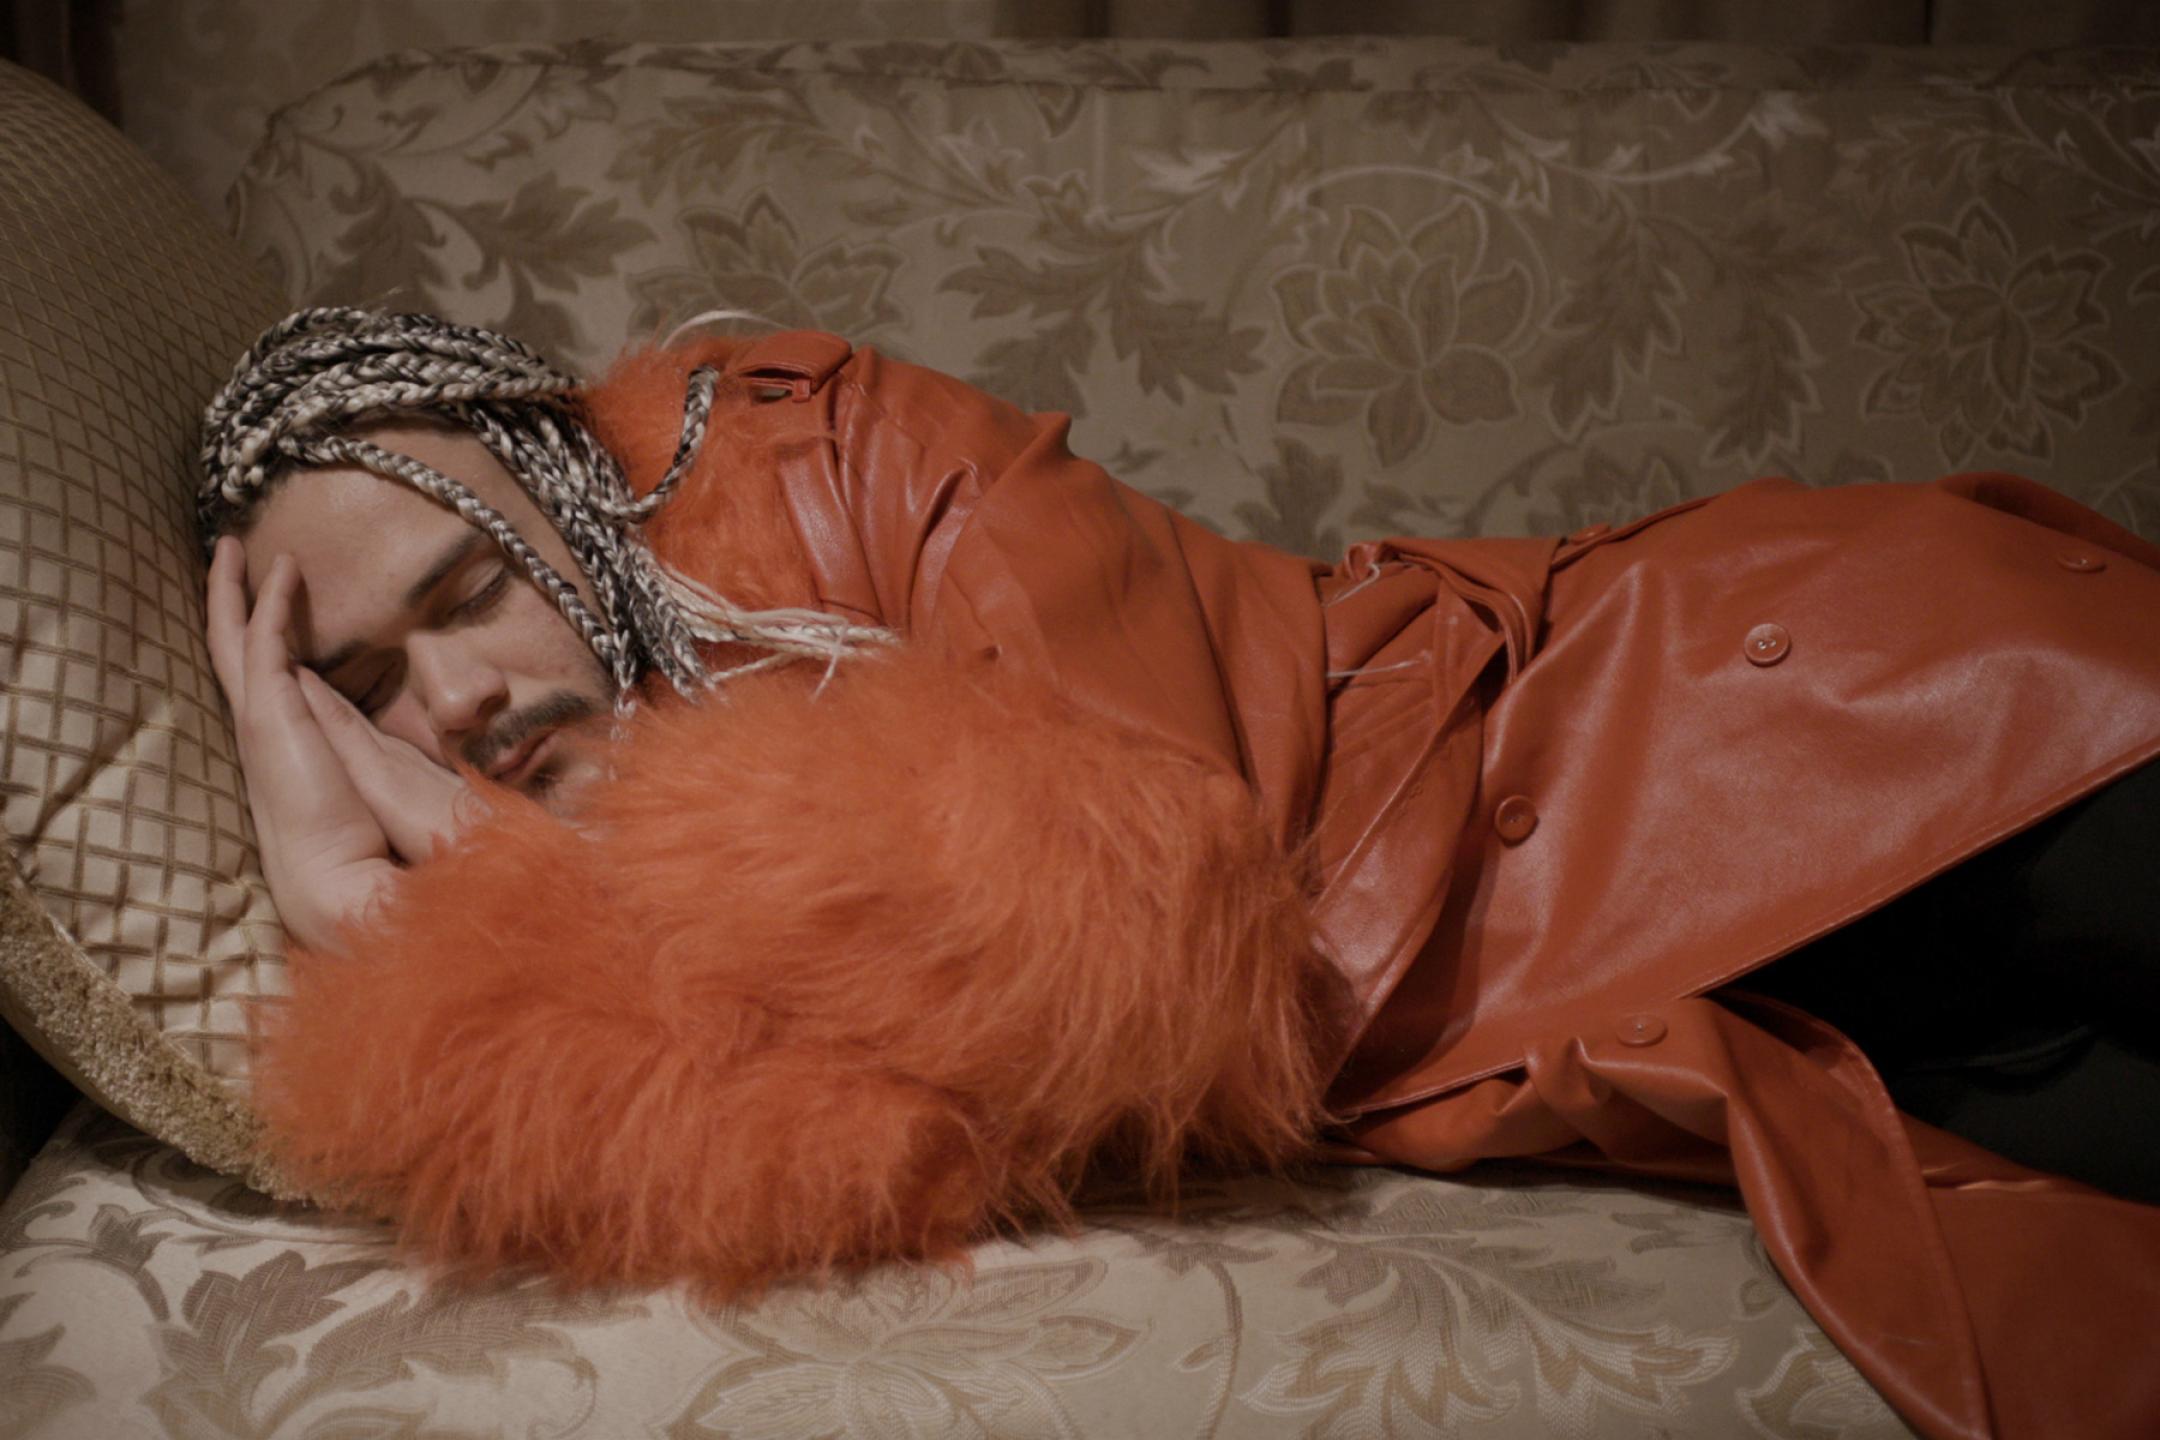 A man with blond braids and a red leather jacket lies on a sofa. He has his eyes closed.